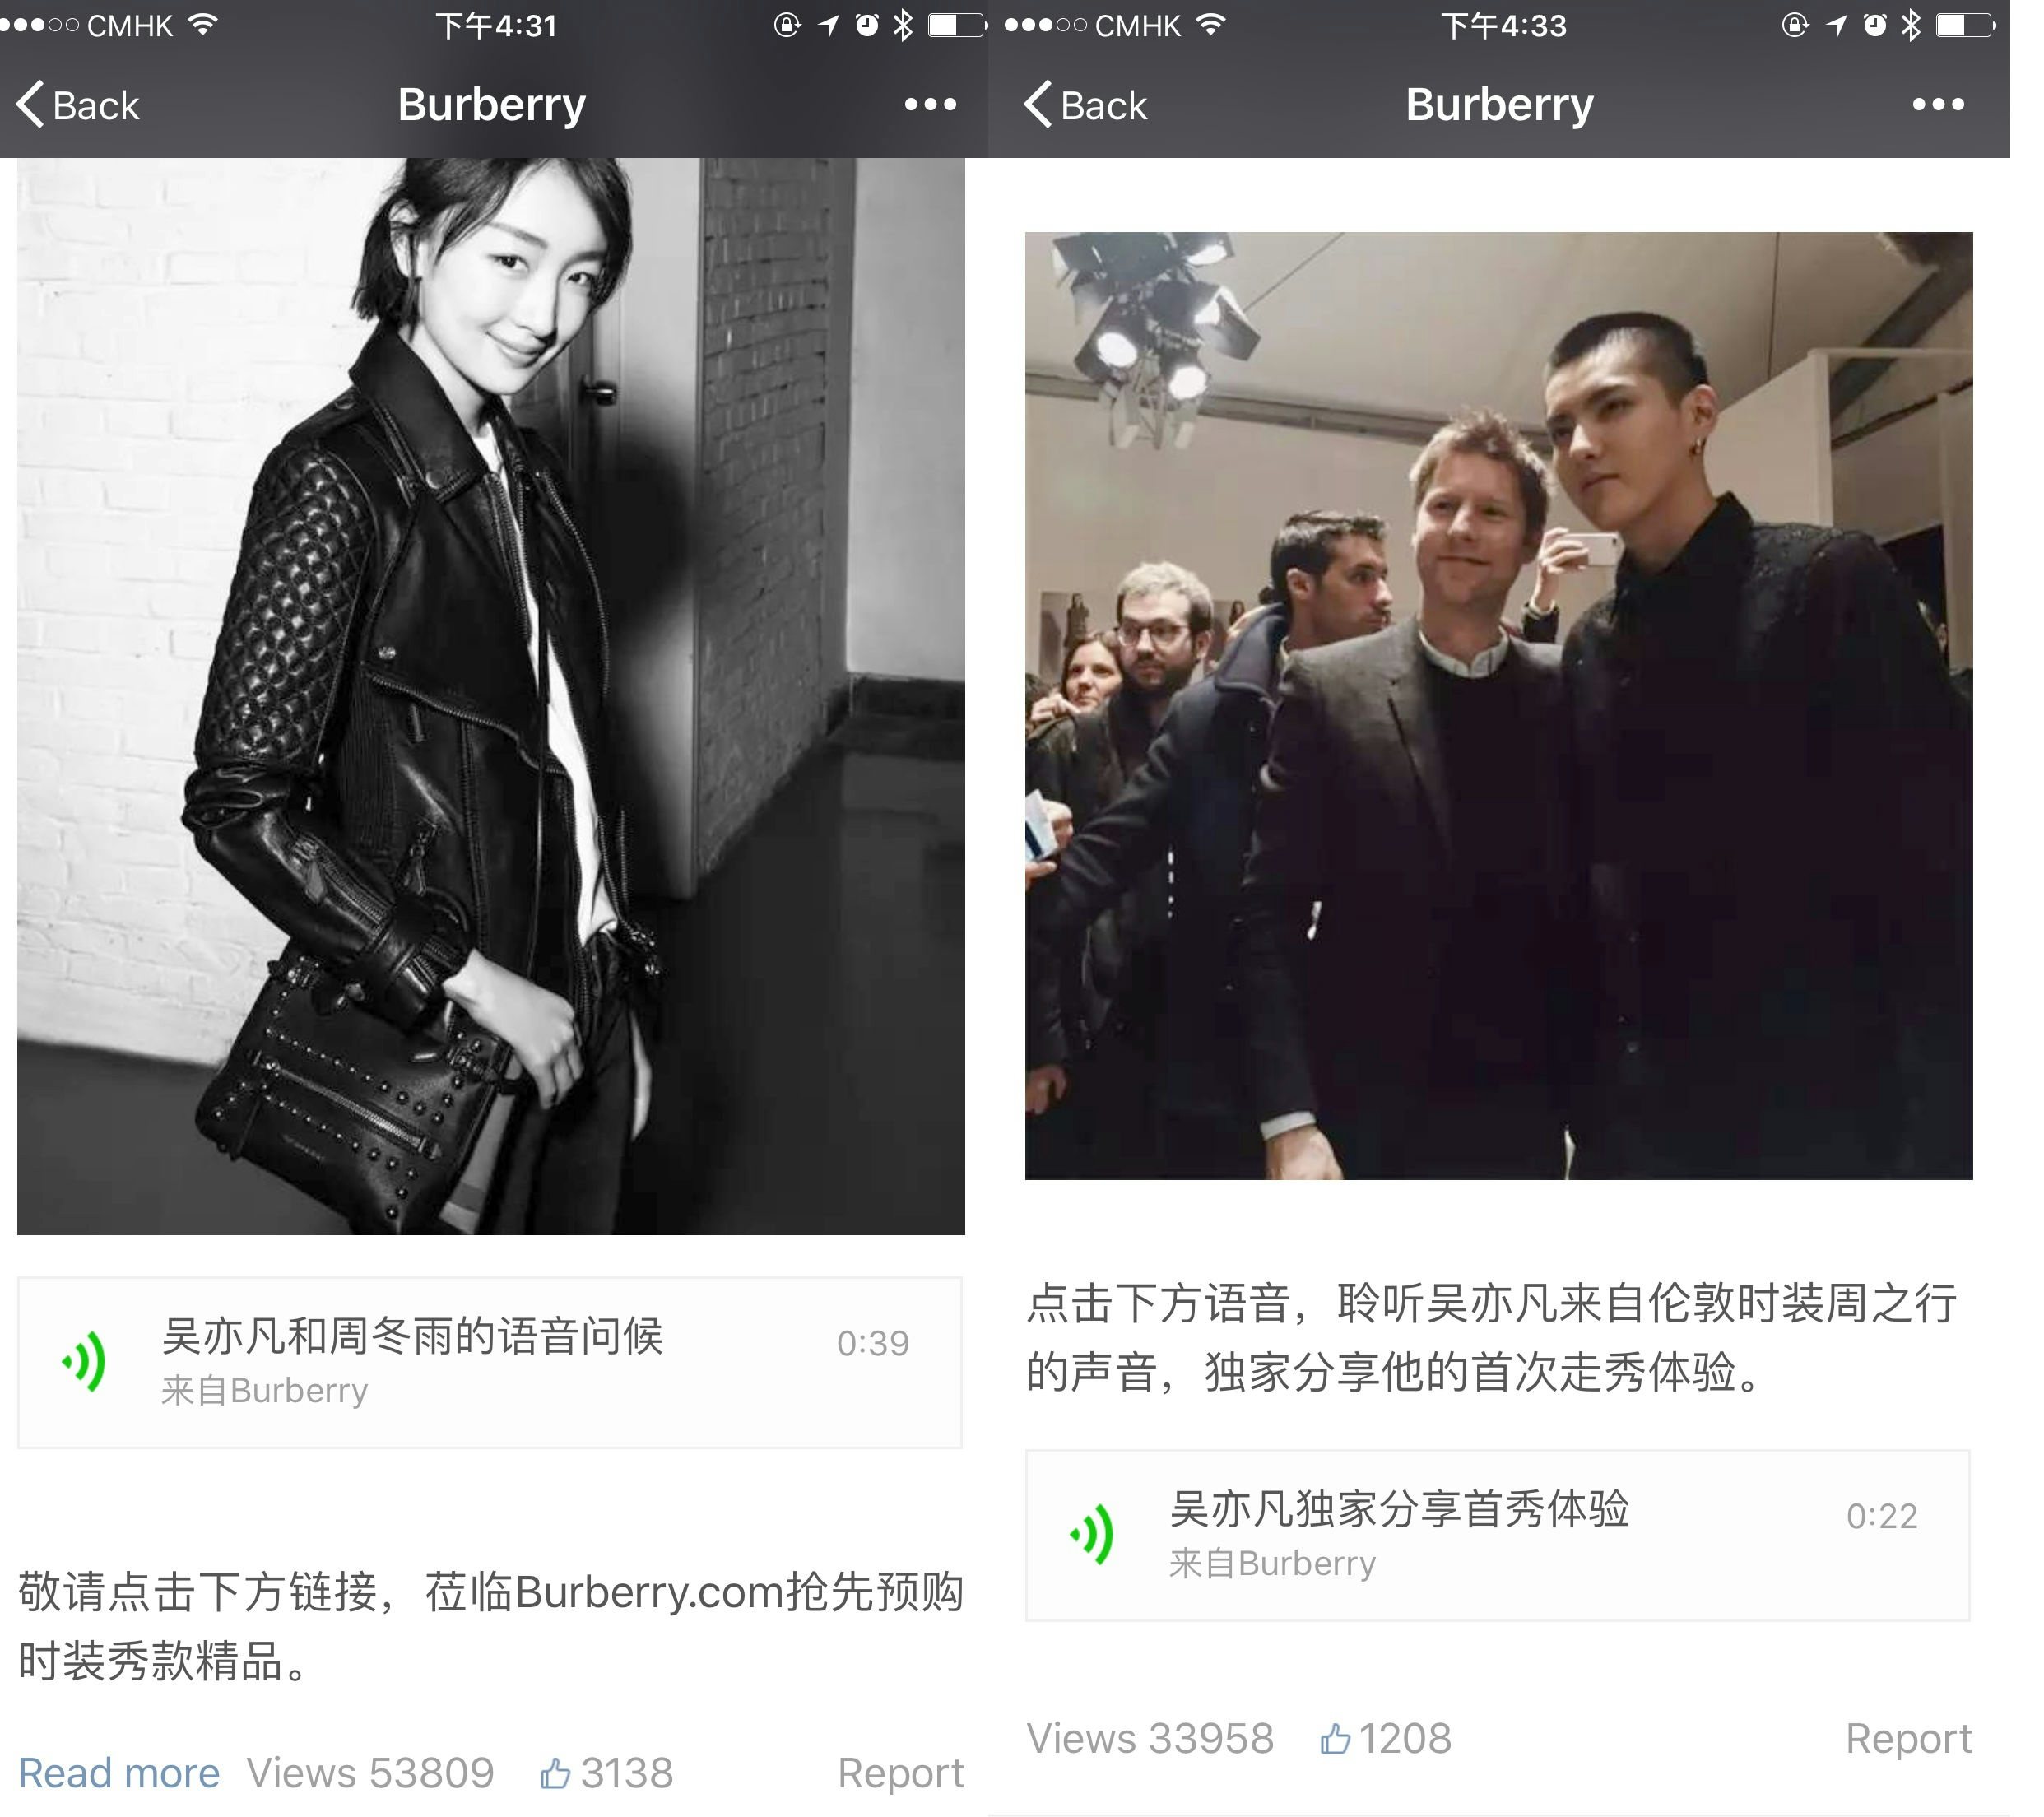 Burberry used Chinese social media to win consumers during their past two fashion shows by hosting a mini-podcast on WeChat.